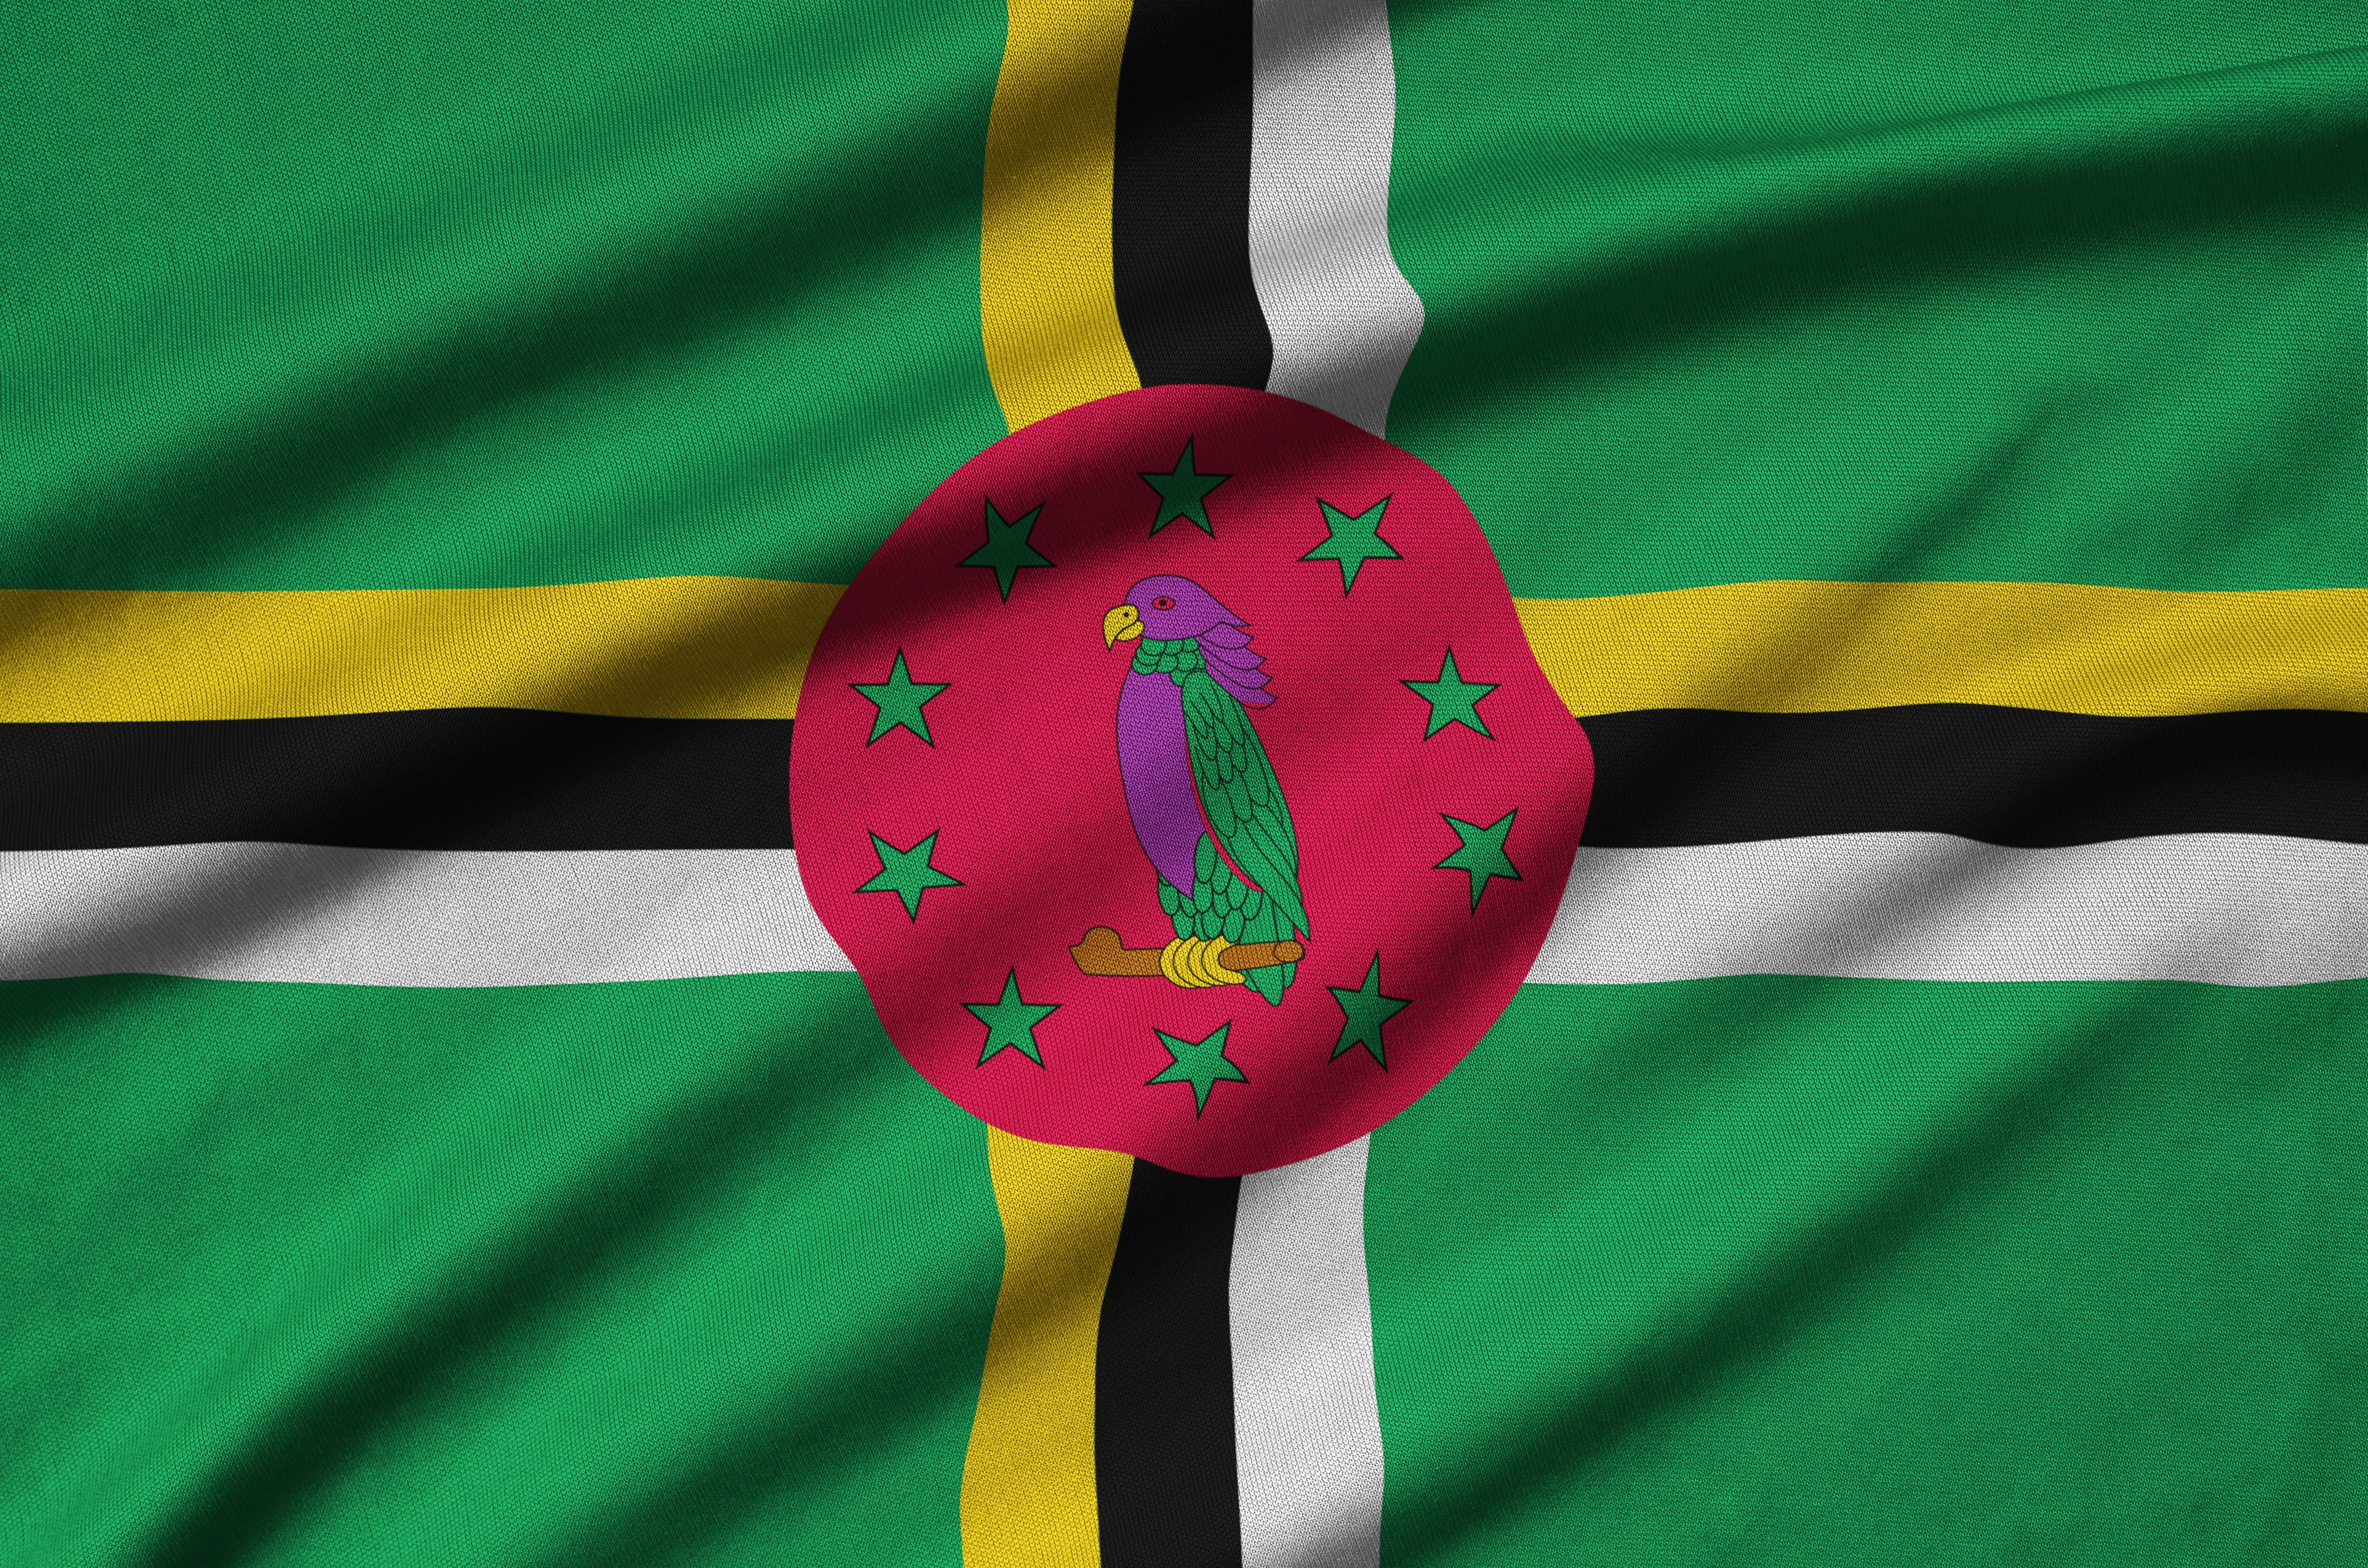 dominica-flag-is-depicted-on-a-sports-cloth-fabric-N4CJ8BD.jpg (14.34 MB)